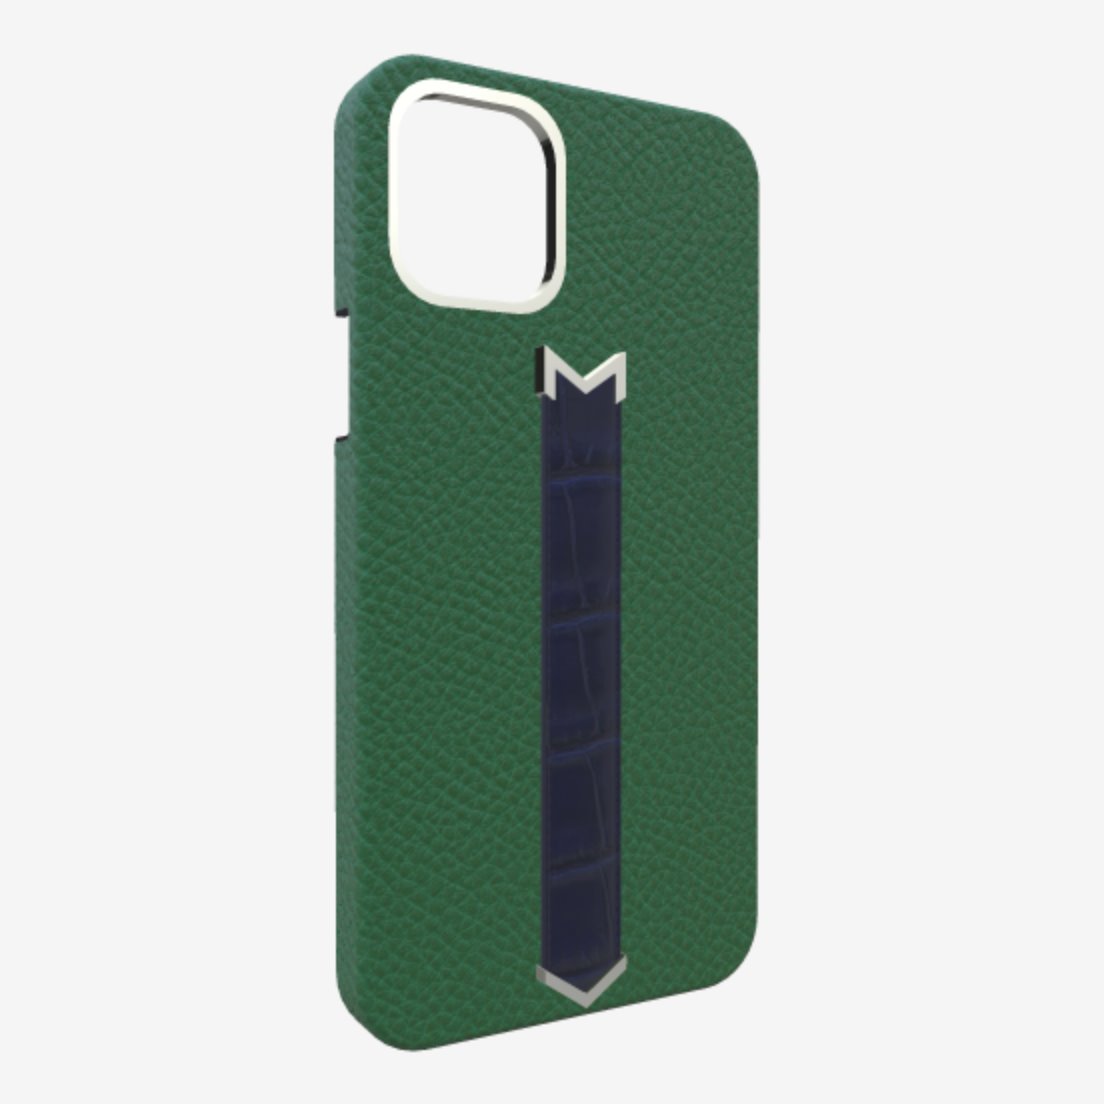 Silver Finger Strap Case for iPhone 13 Pro in Genuine Calfskin and Alligator Emerald-Green Navy-Blue 